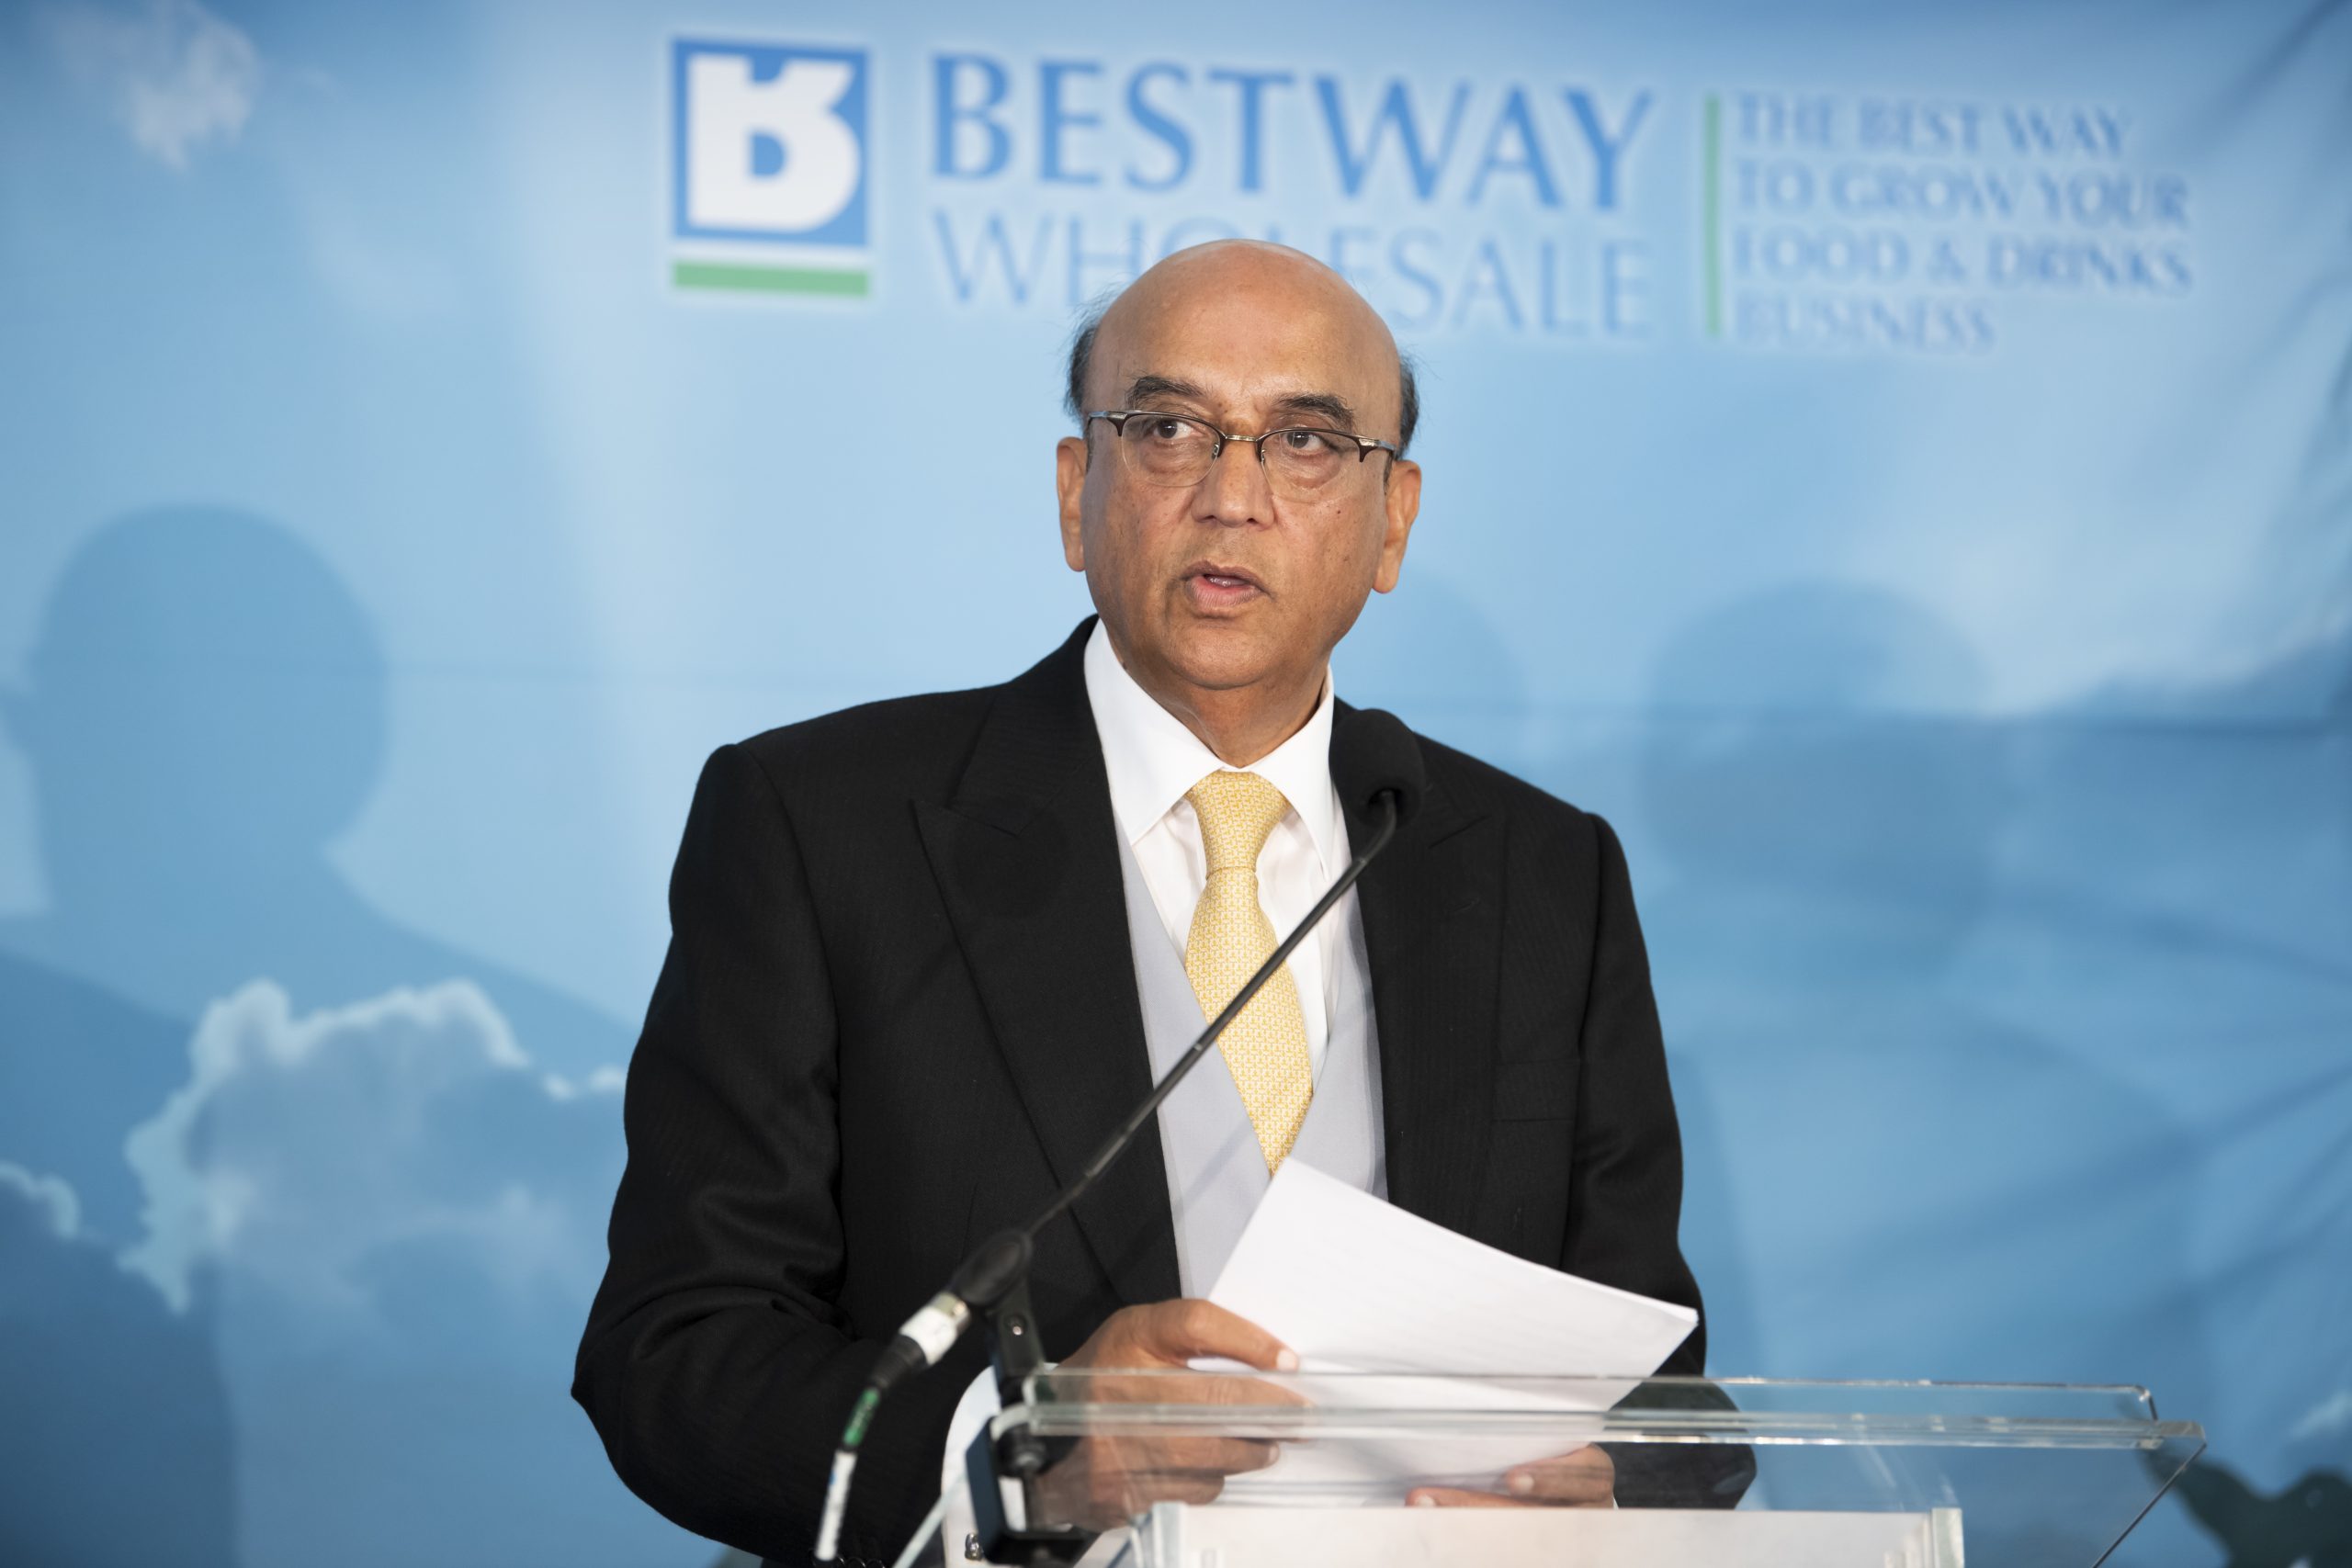 Bestway’s Charity Race Day returns to Royal Ascot after hiatus